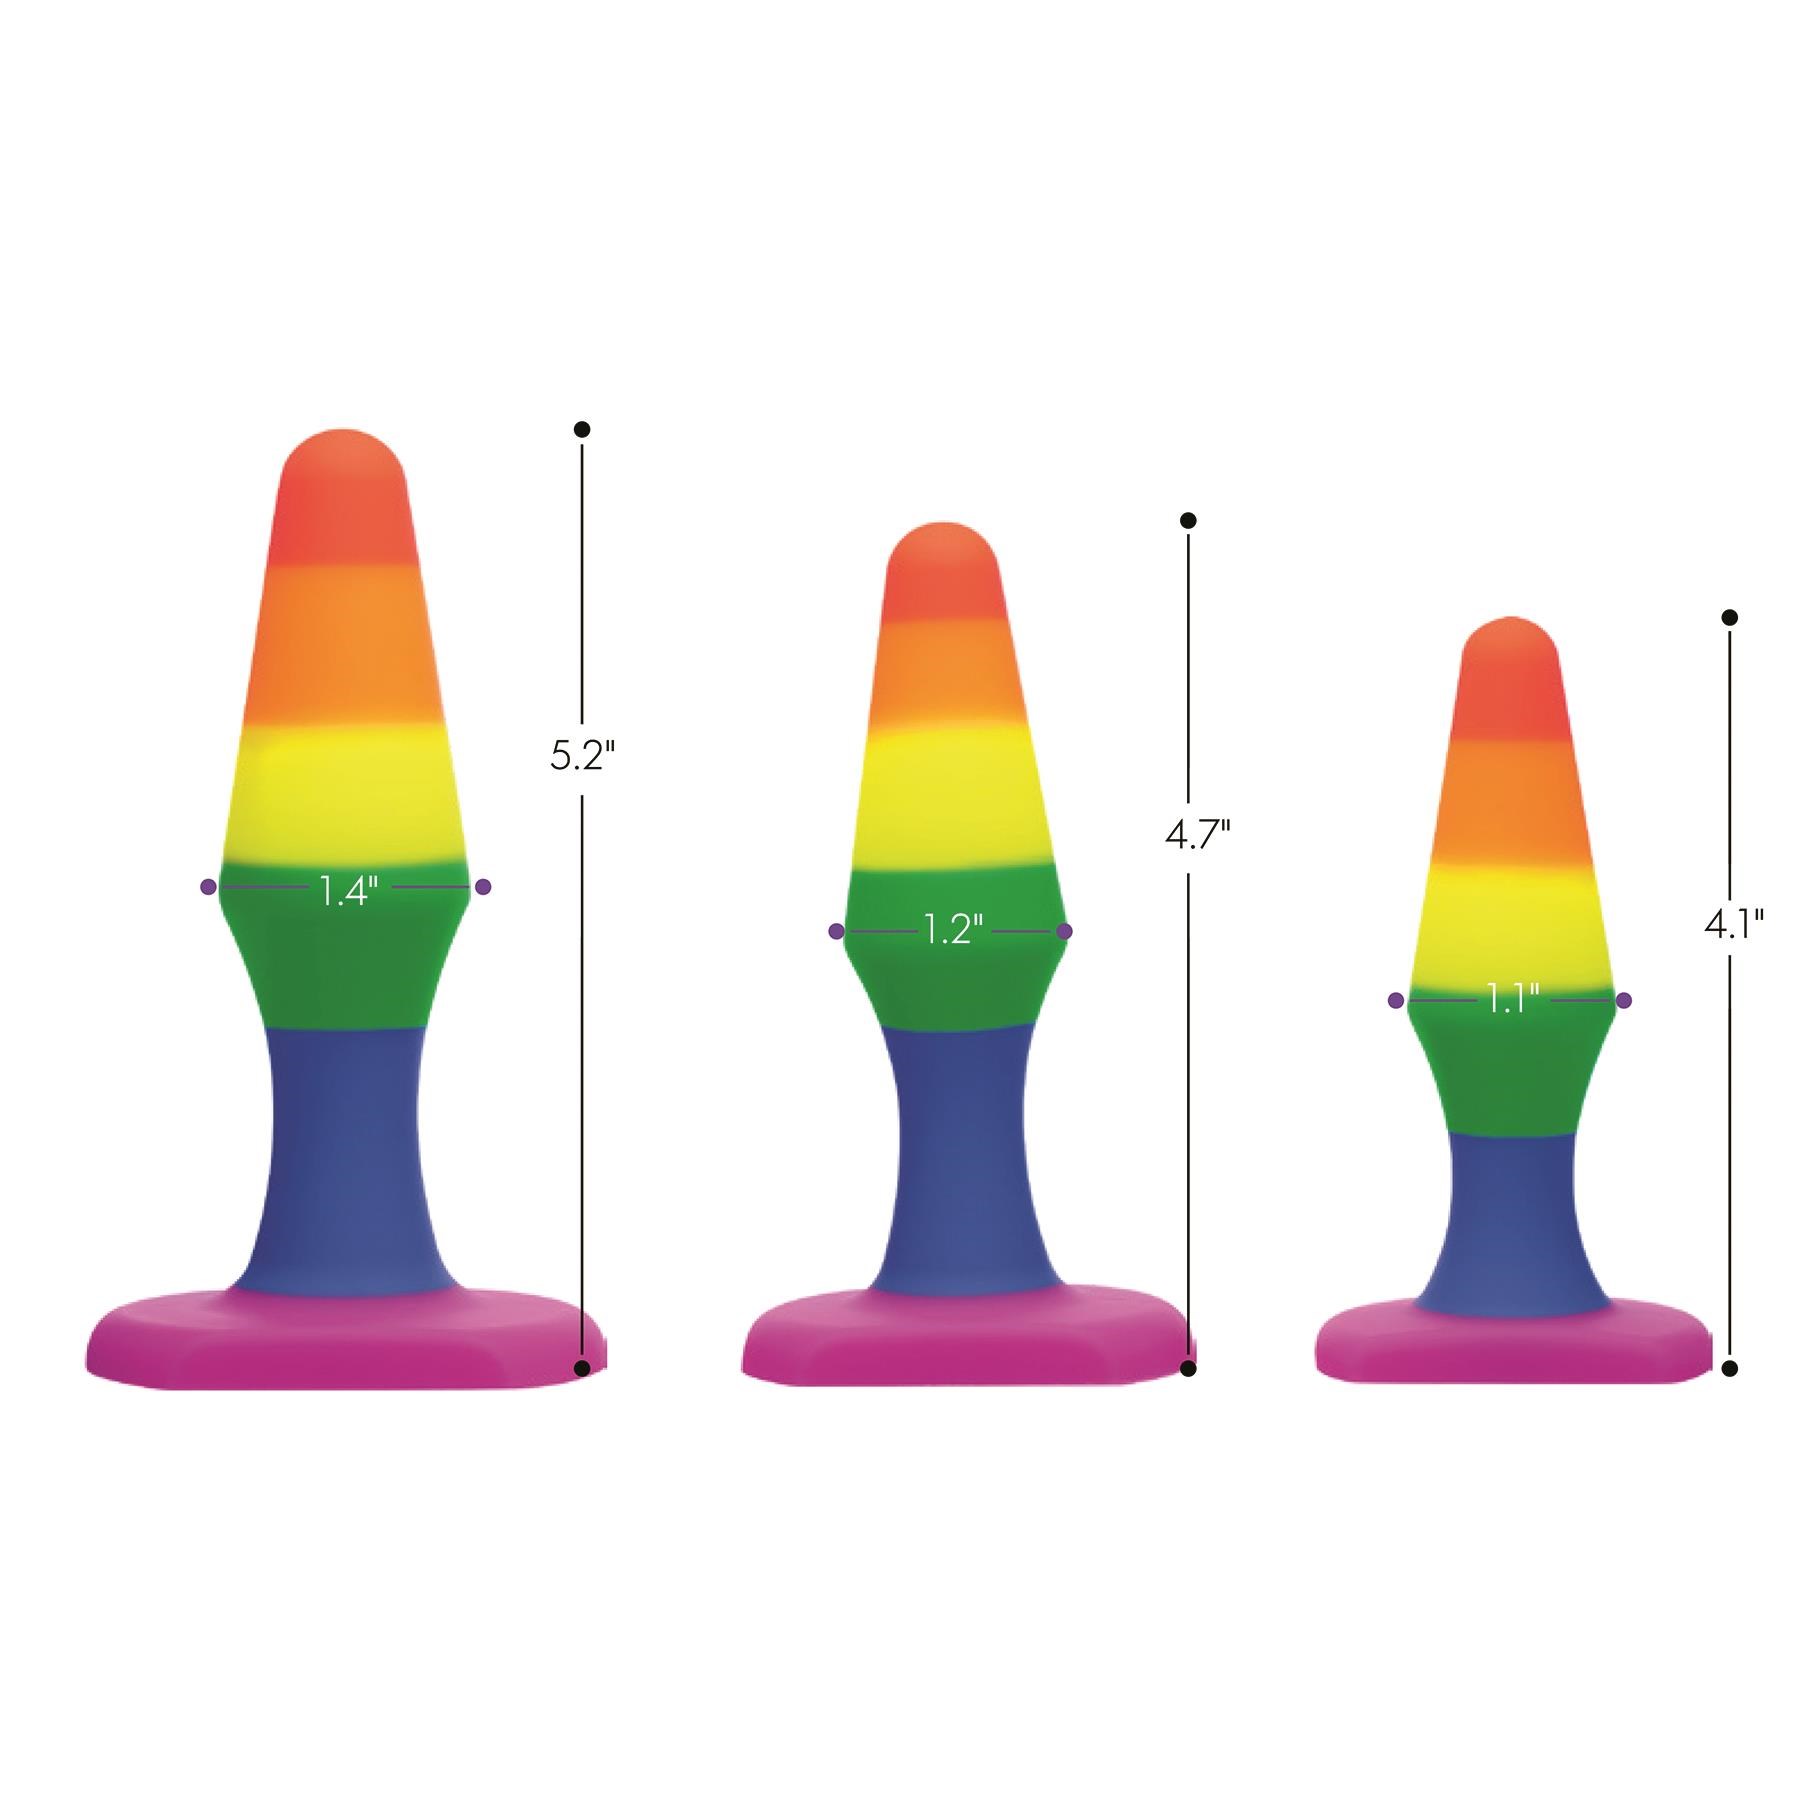 Rainbow Ready Anal Trainer Set - Product Shot with Dimensions